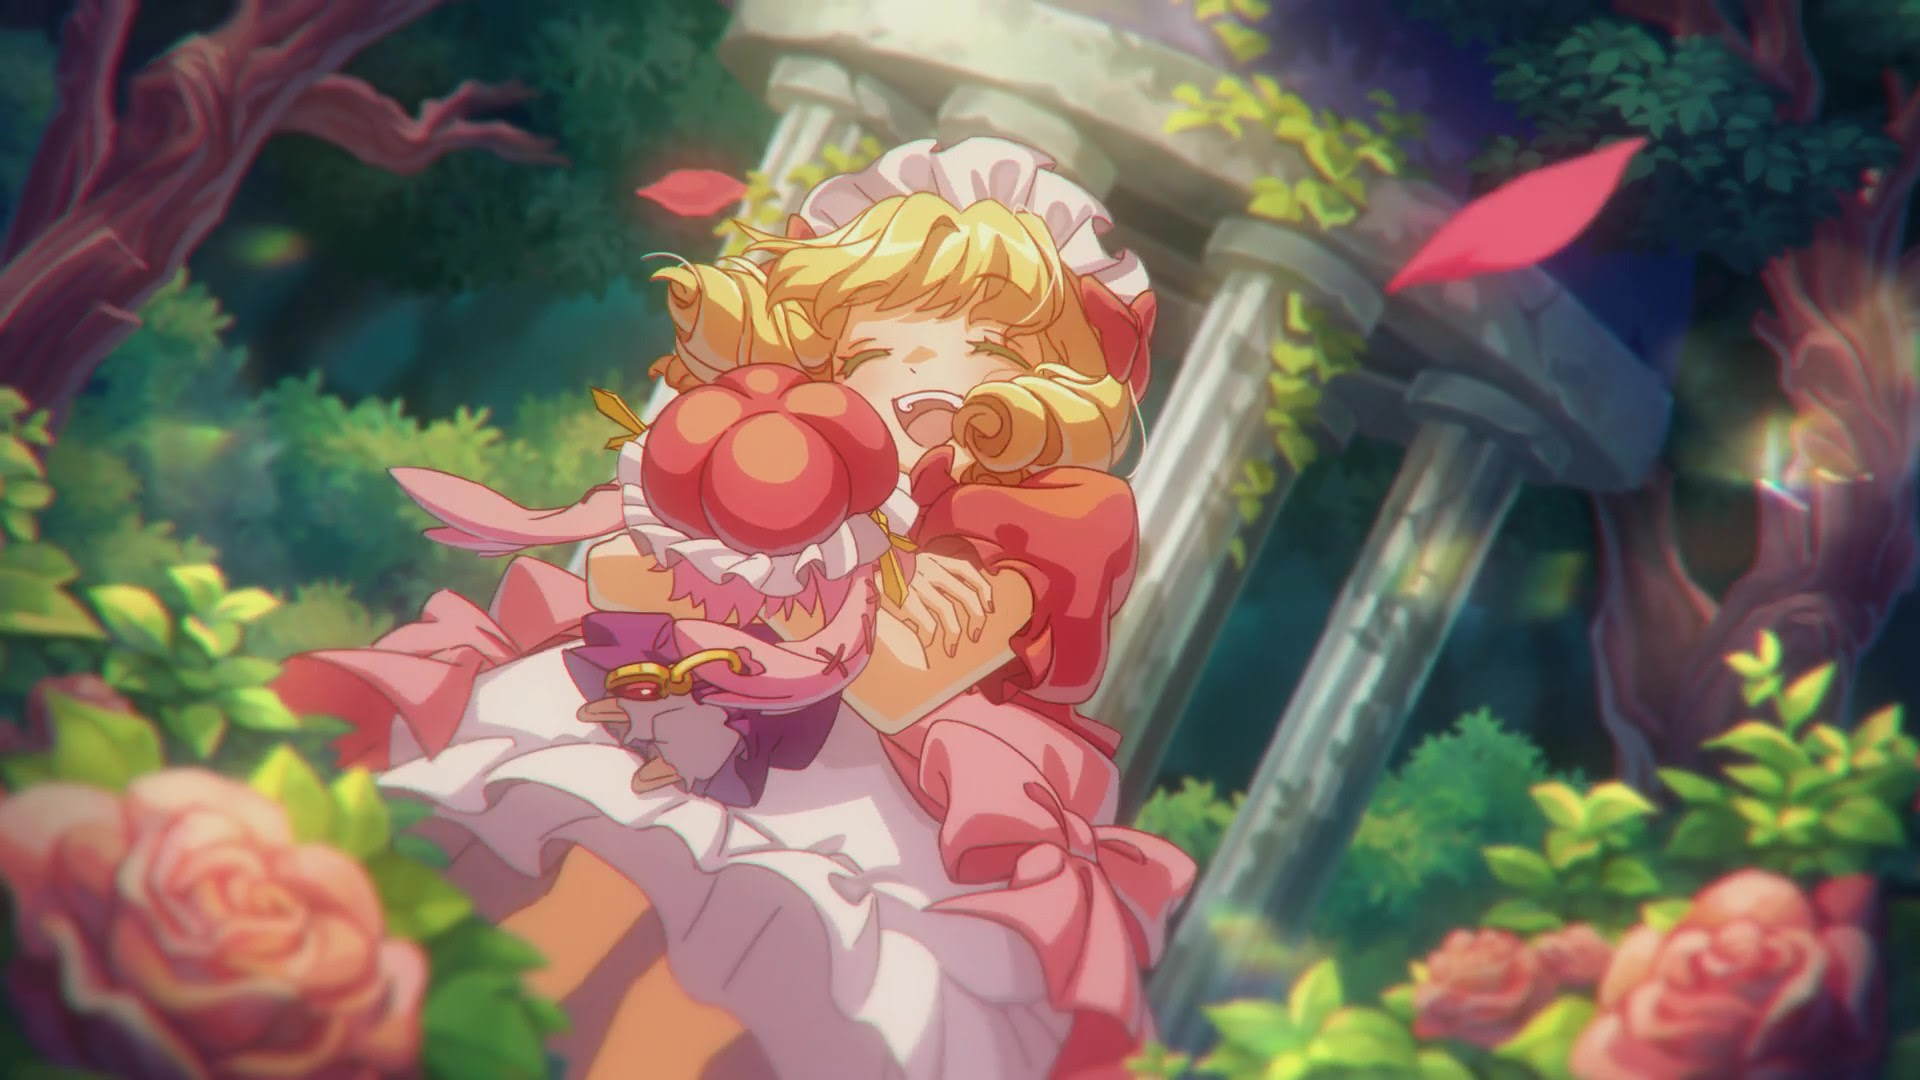 Horror RPG ‘Pocket Mirror: GoldeneTraum’ Launches on Steam; Remastered Illustration, New Ending, and Gameplay Improvements